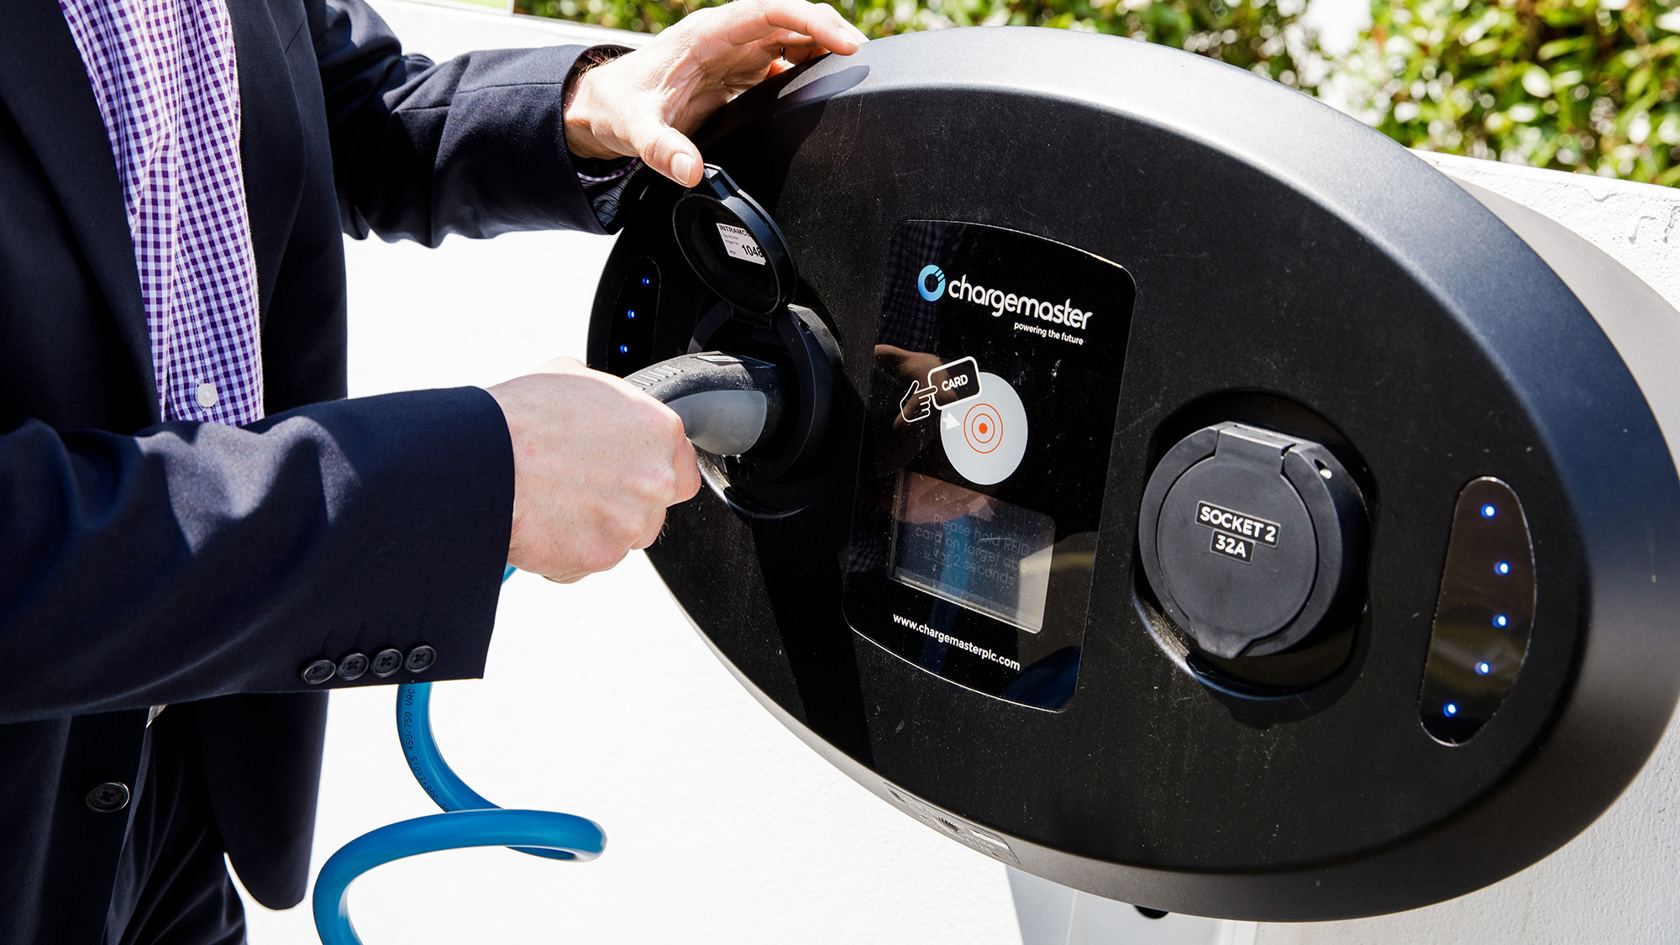 A man in a suit uses the electric vehicle charger at The Powerhouse